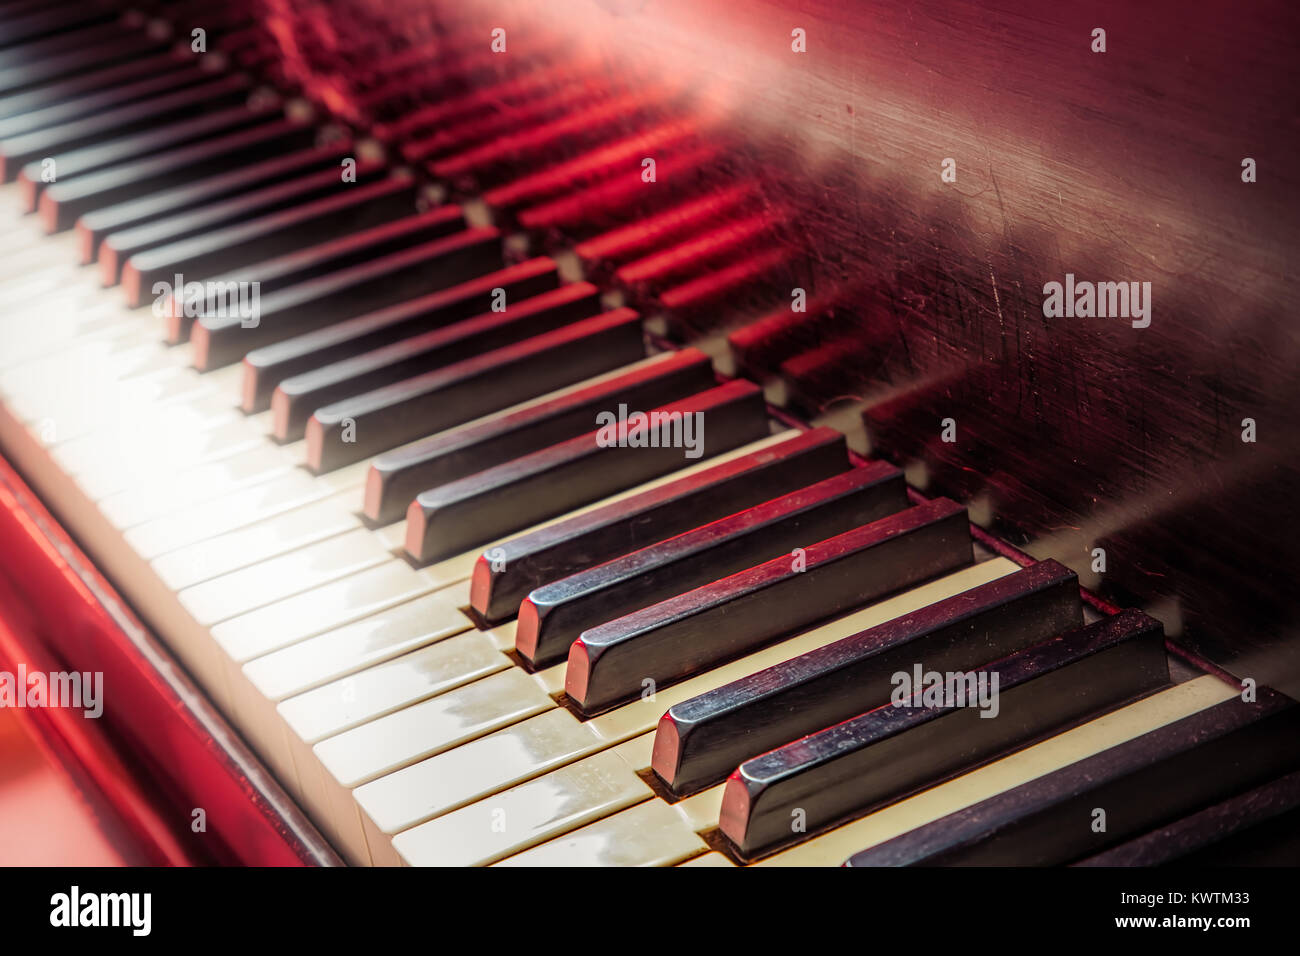 The keys of a piano with a red light in the background. Stock Photo